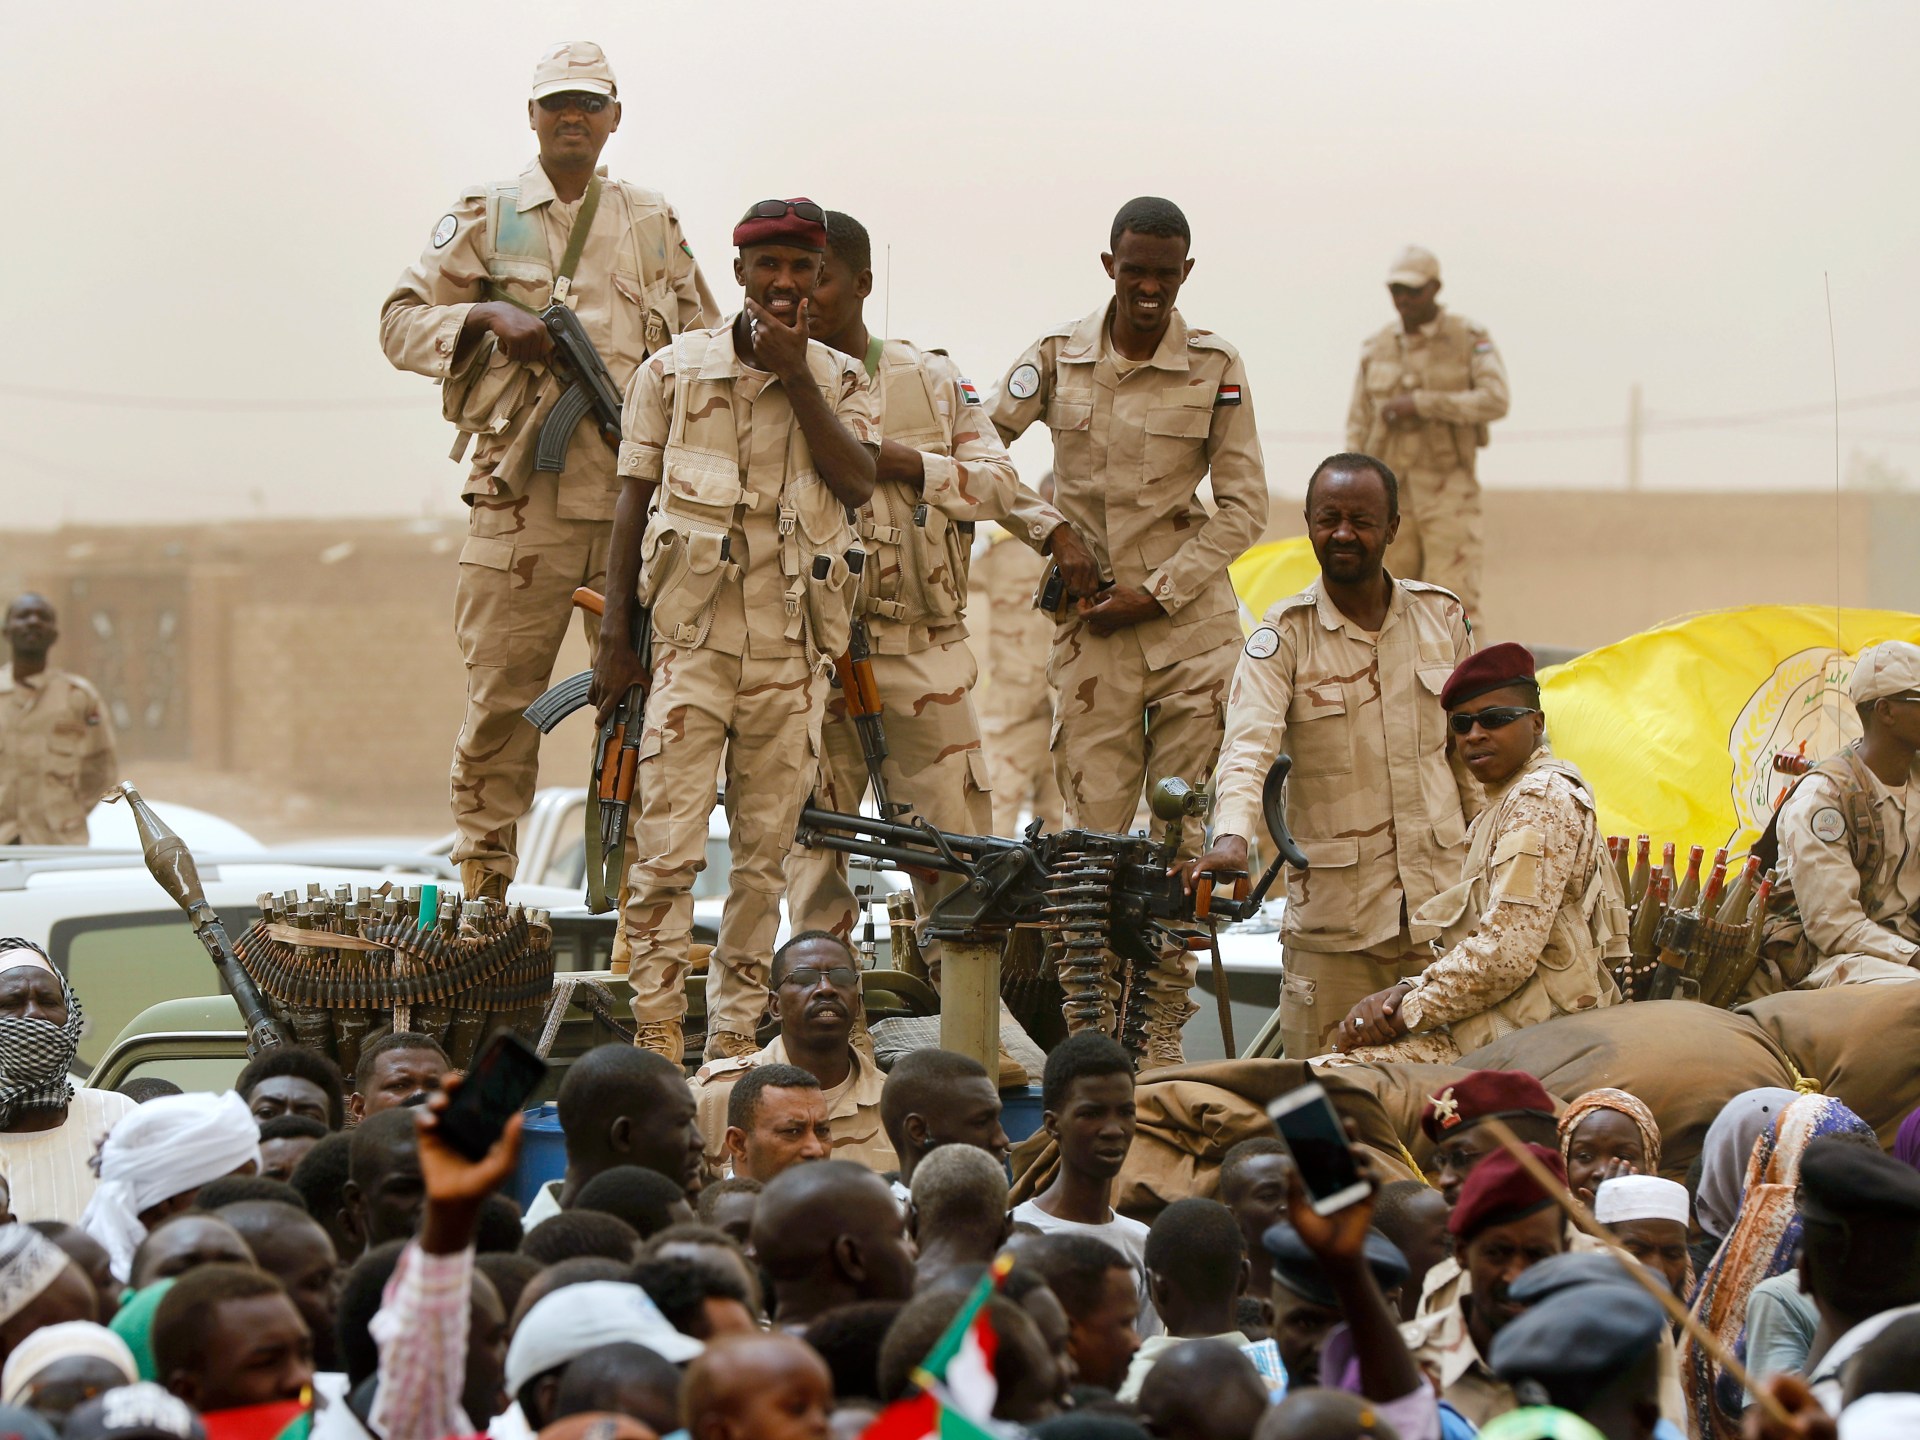 African mediators claim progress in latest effort to end war in Sudan | Conflict News #African #mediators #claim #progress #latest #effort #war #Sudan #Conflict #News